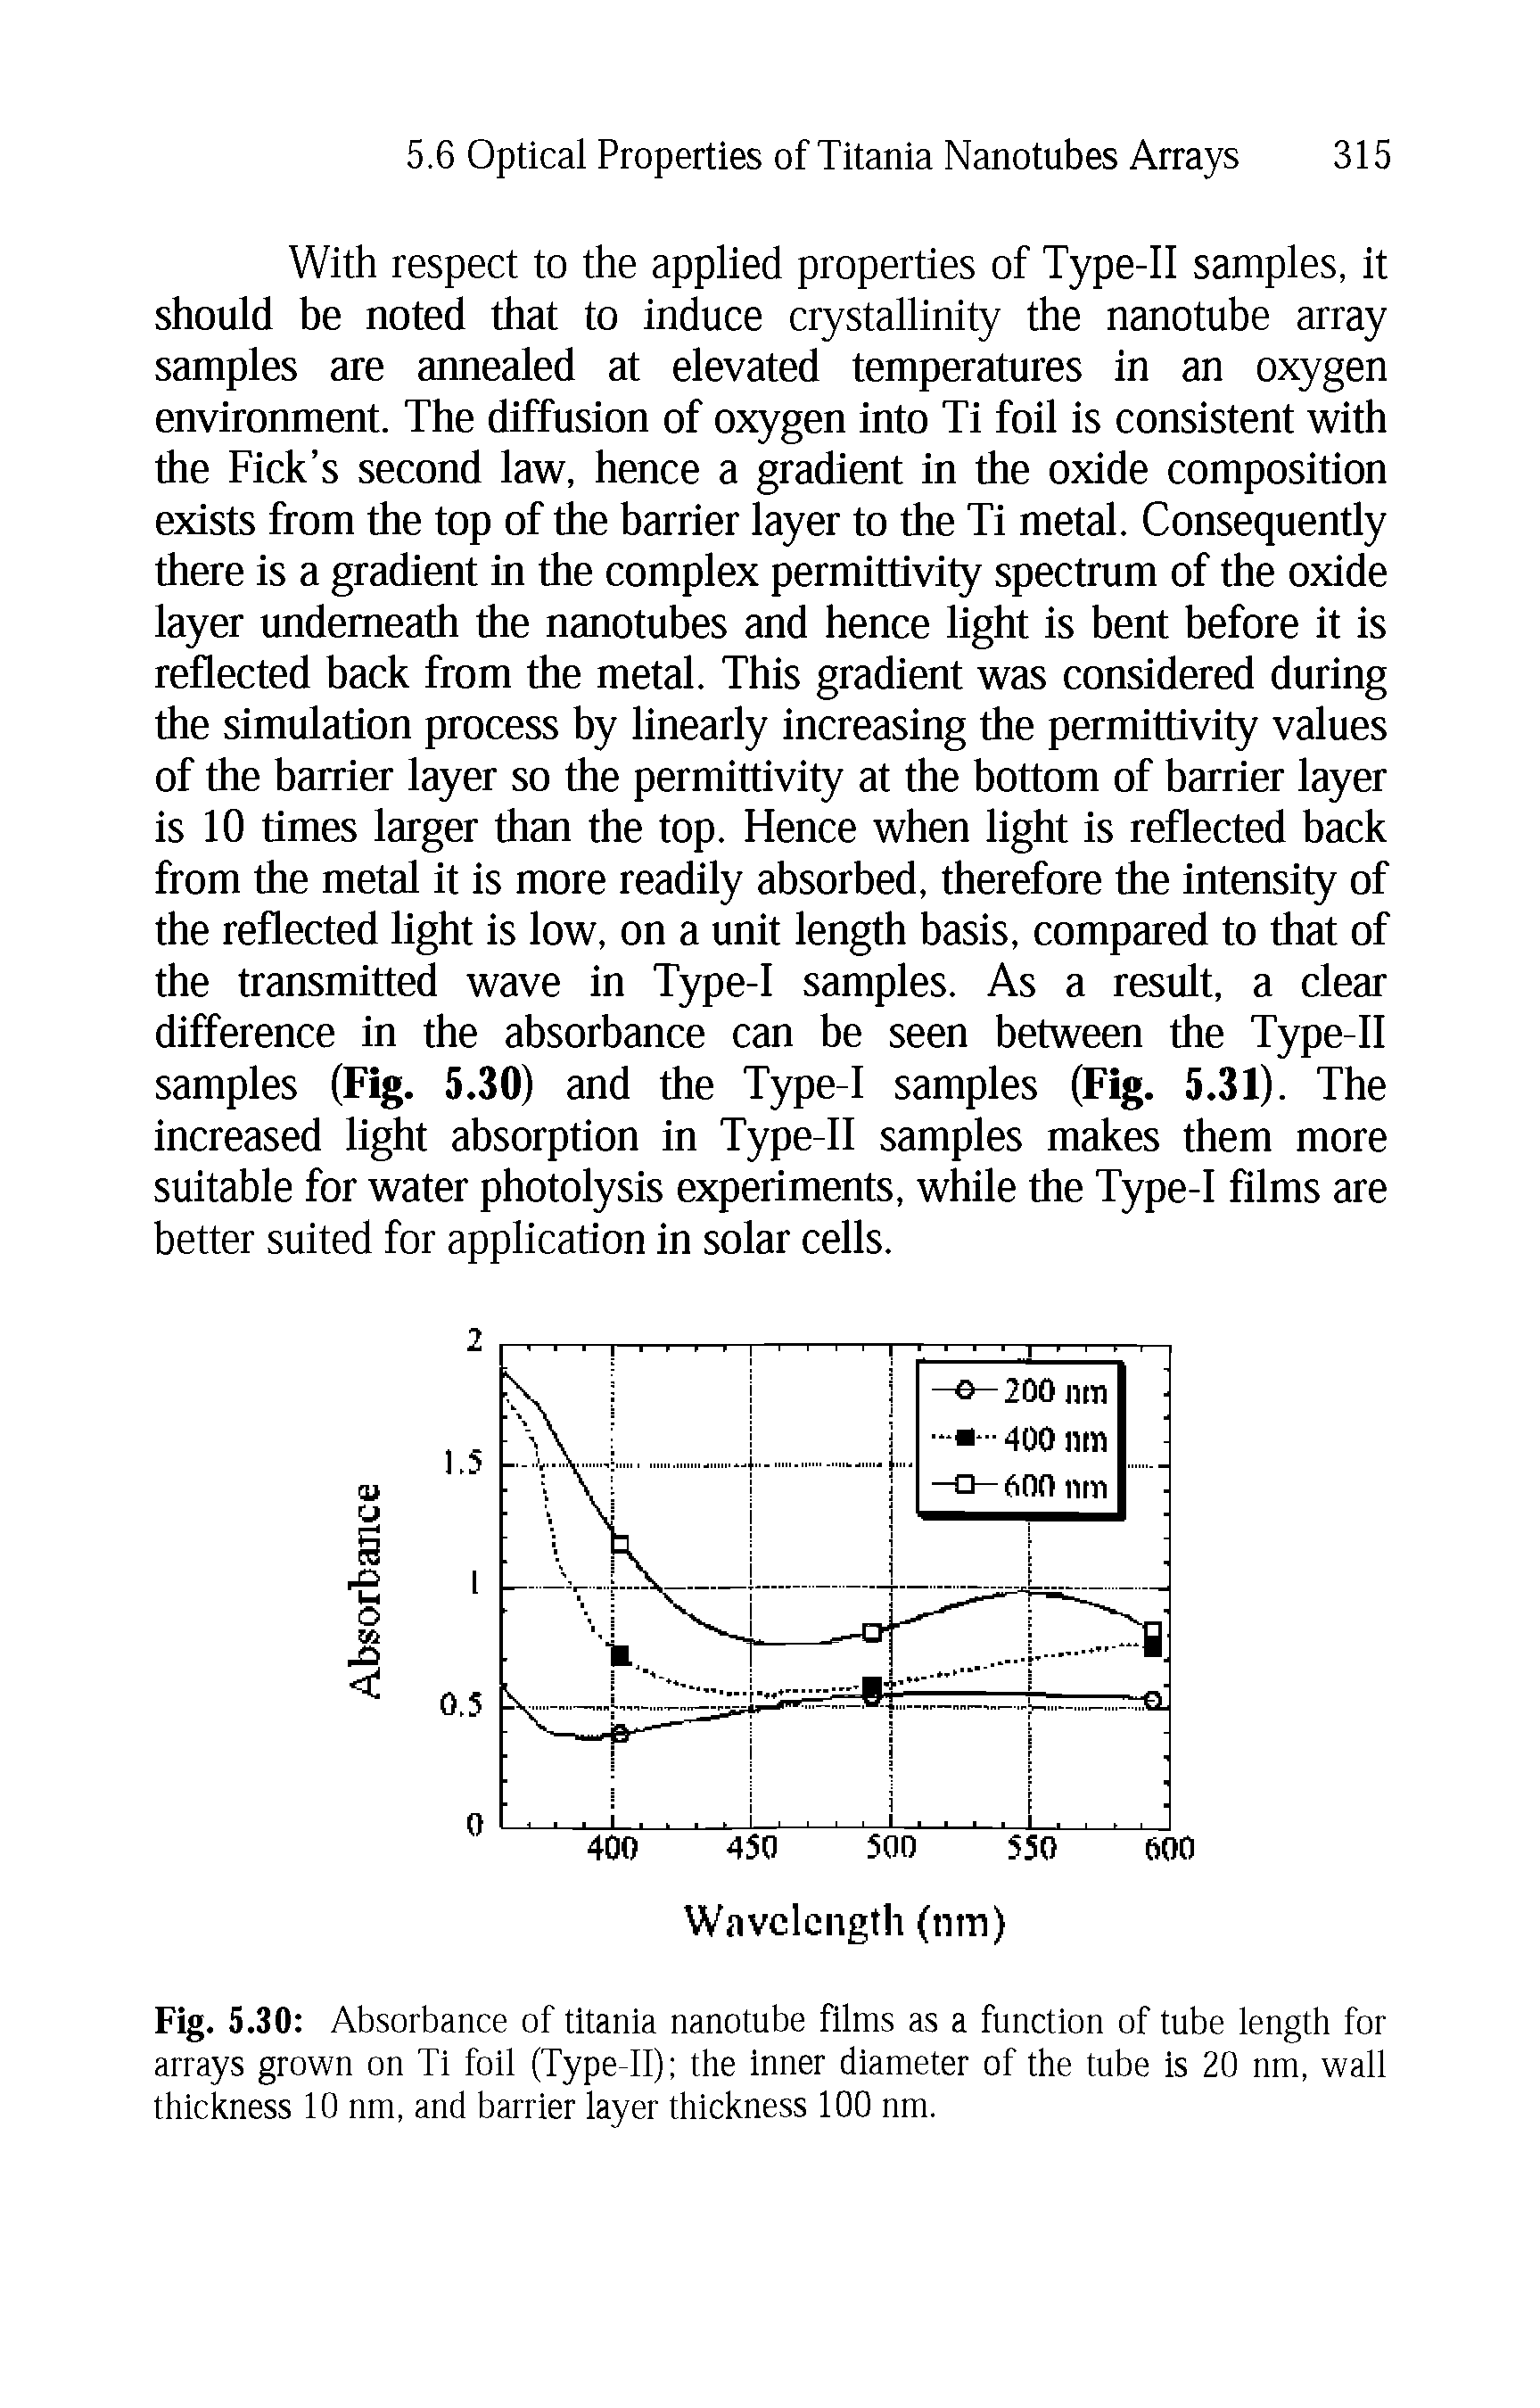 Fig. 5.30 Absorbance of titania nanotube films as a function of tube length for arrays grown on Ti foil (Type-II) the inner diameter of the tube is 20 nm, wall thickness 10 nm, and barrier layer thickness 100 nm.